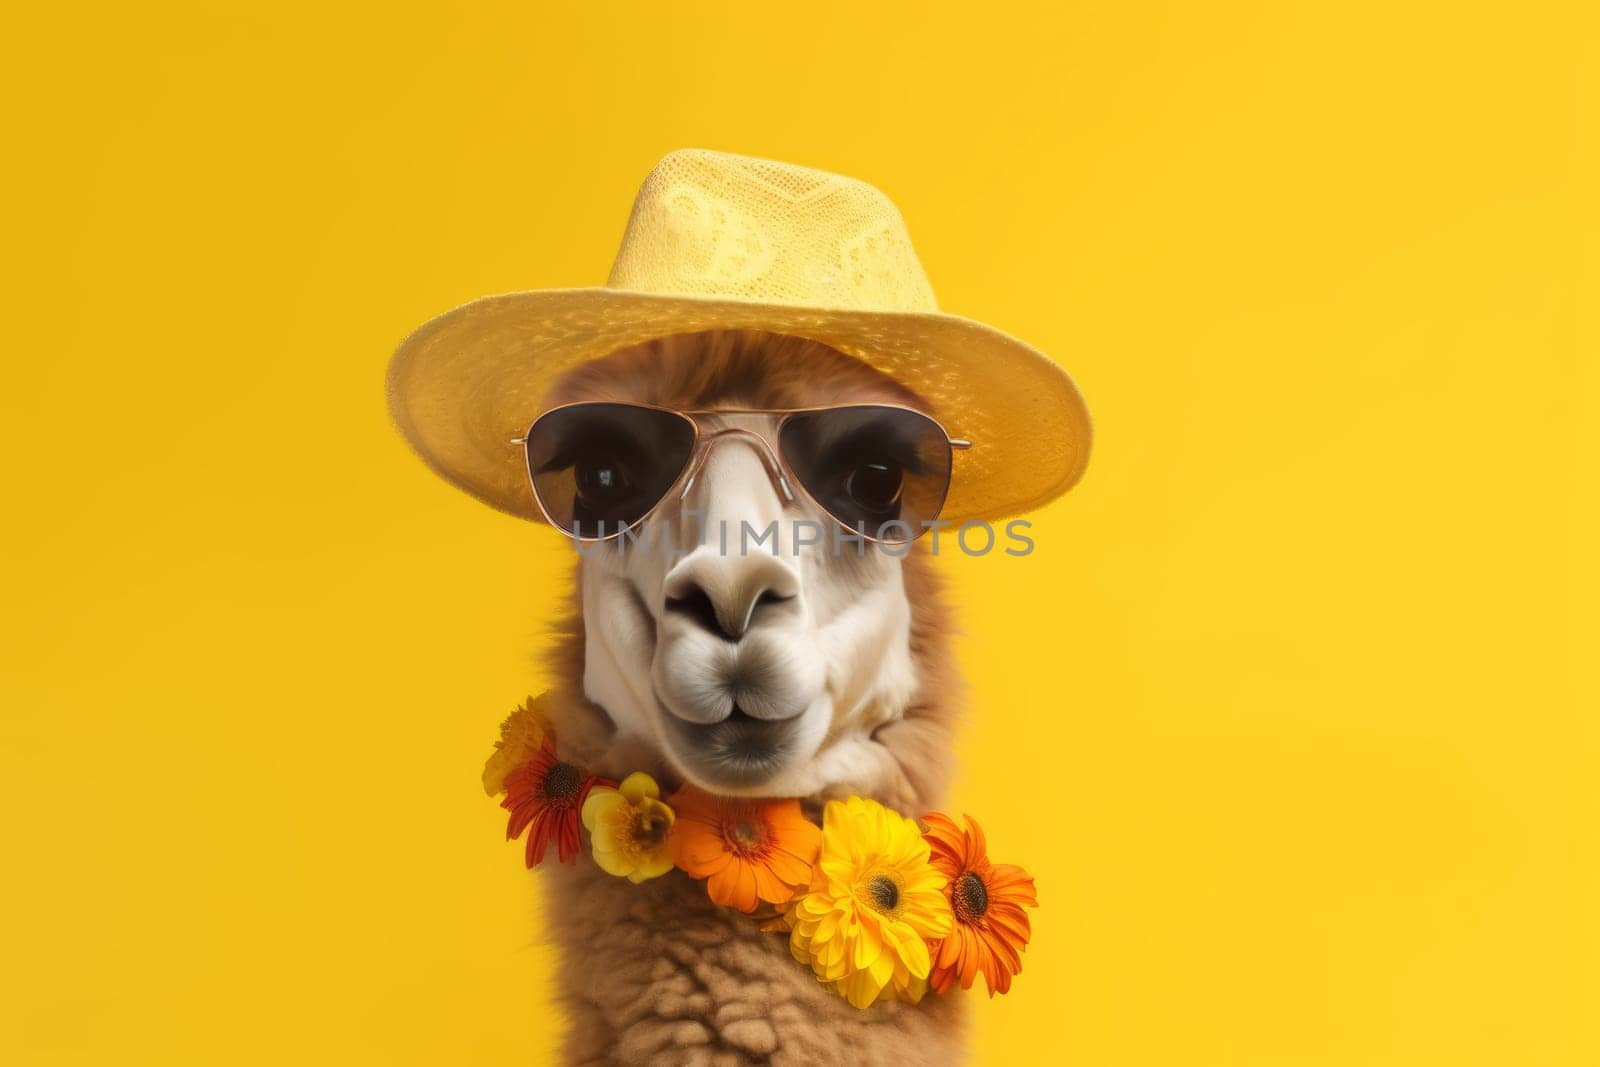 This well-accessorized llama wearing a straw hat and sunglasses presents a whimsical take on summer fashion, set on a sunny backdrop